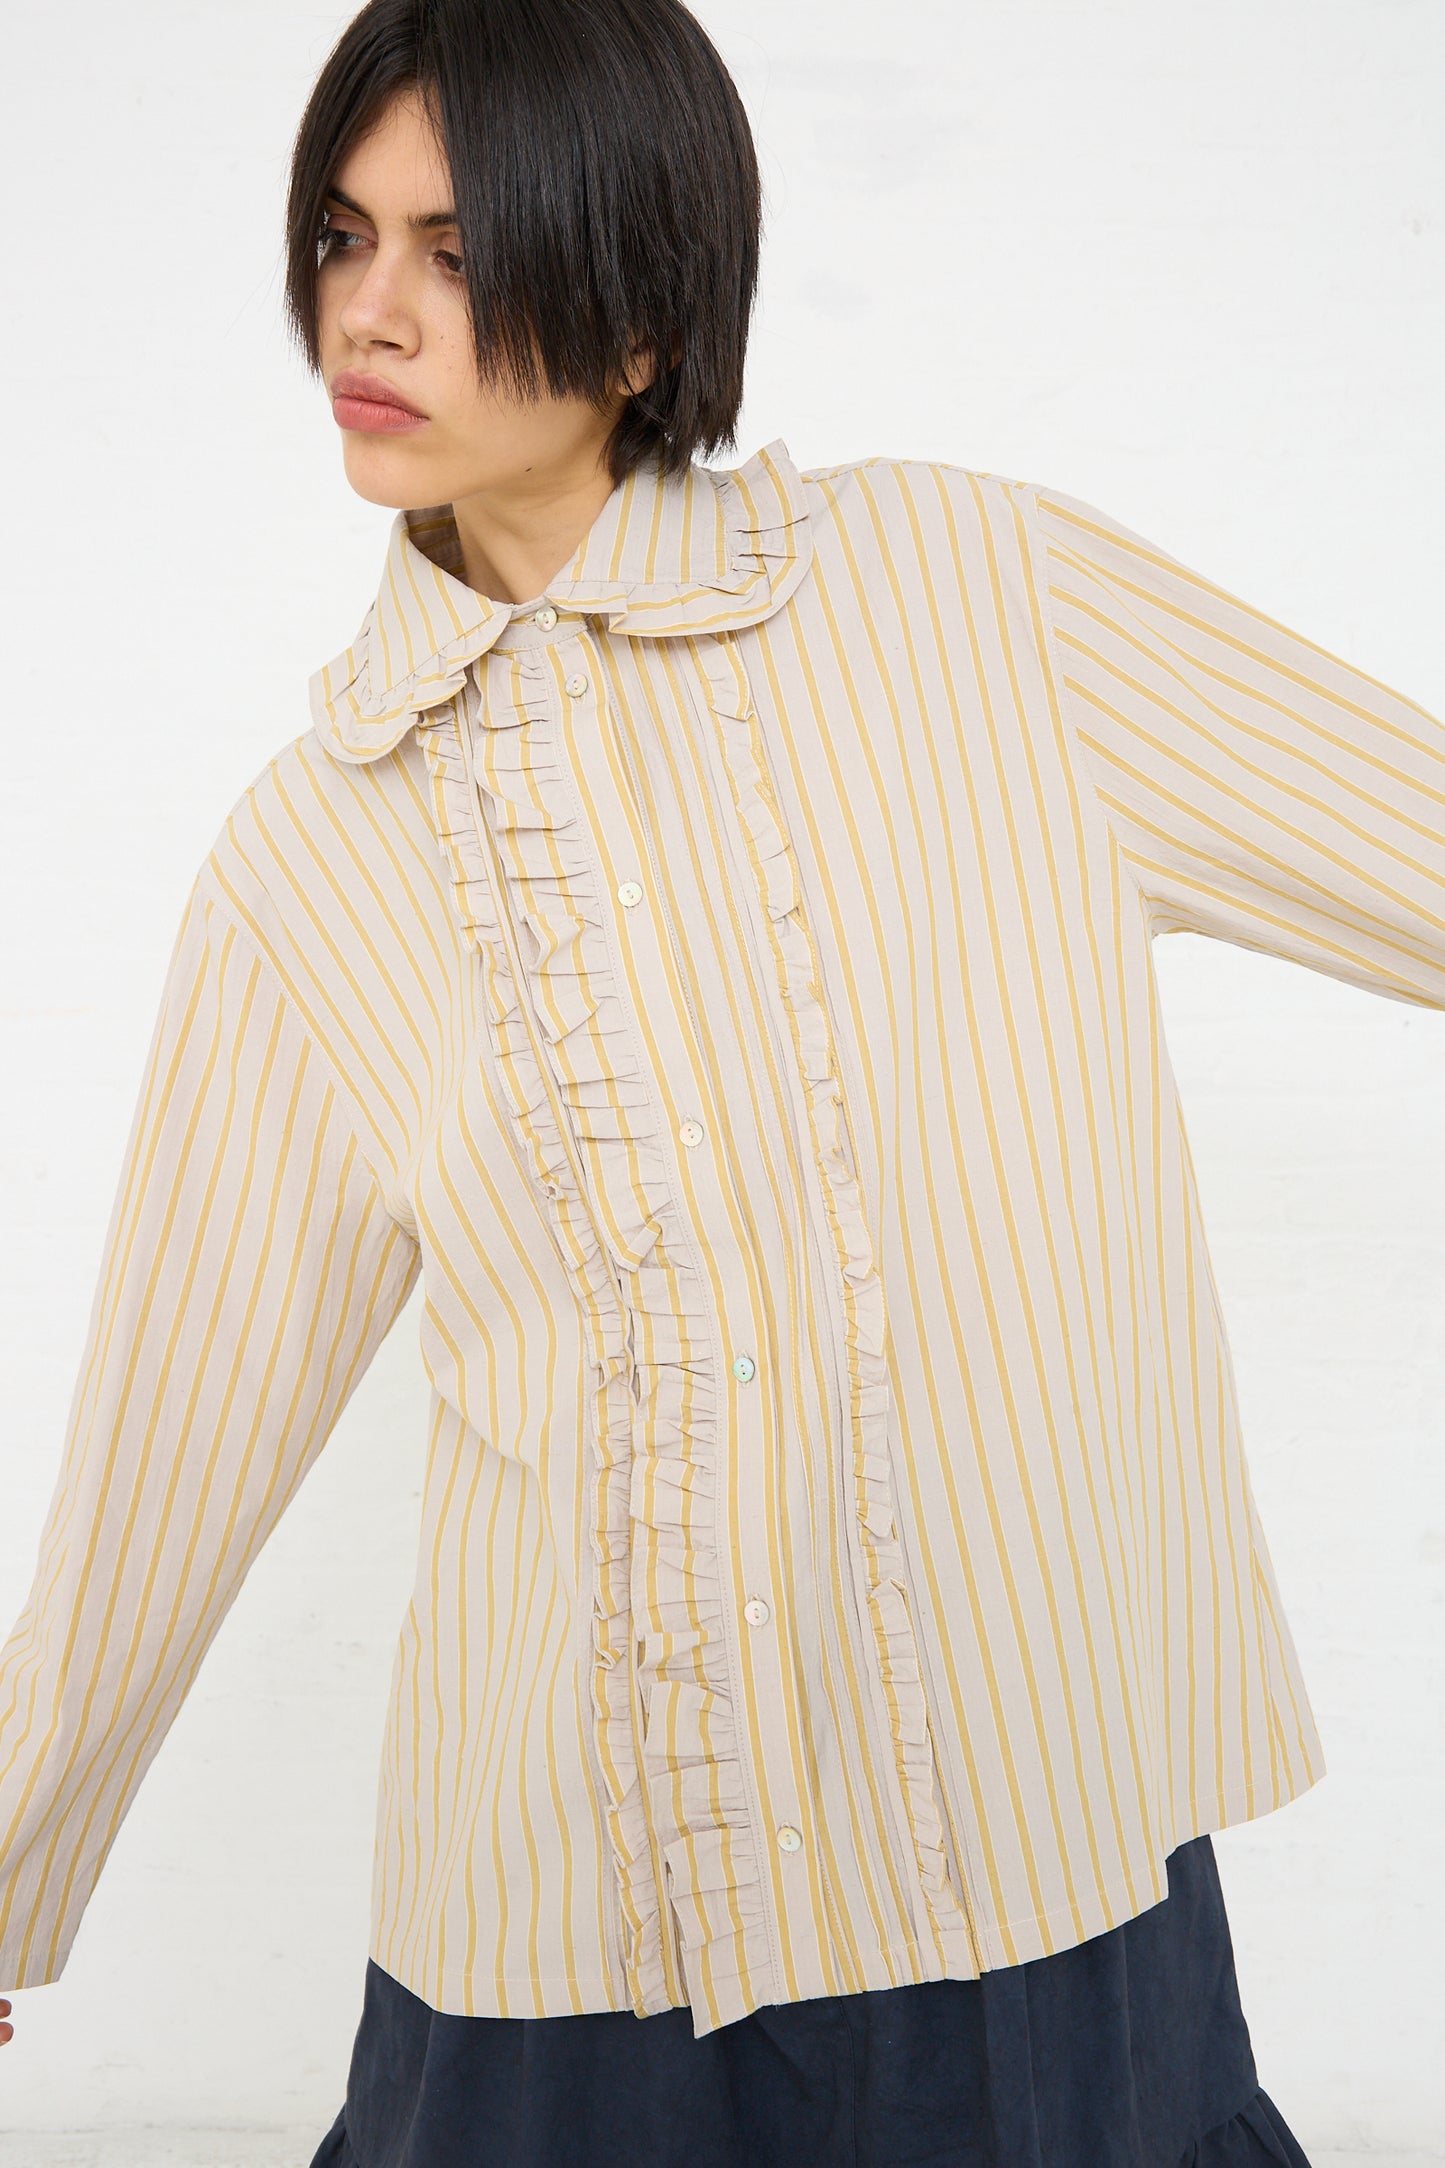 A woman with short black hair wearing a Cawley Japanese Cotton Ruffle Shirt in Sun and Grey, looking to the side with a slight frown on her face.